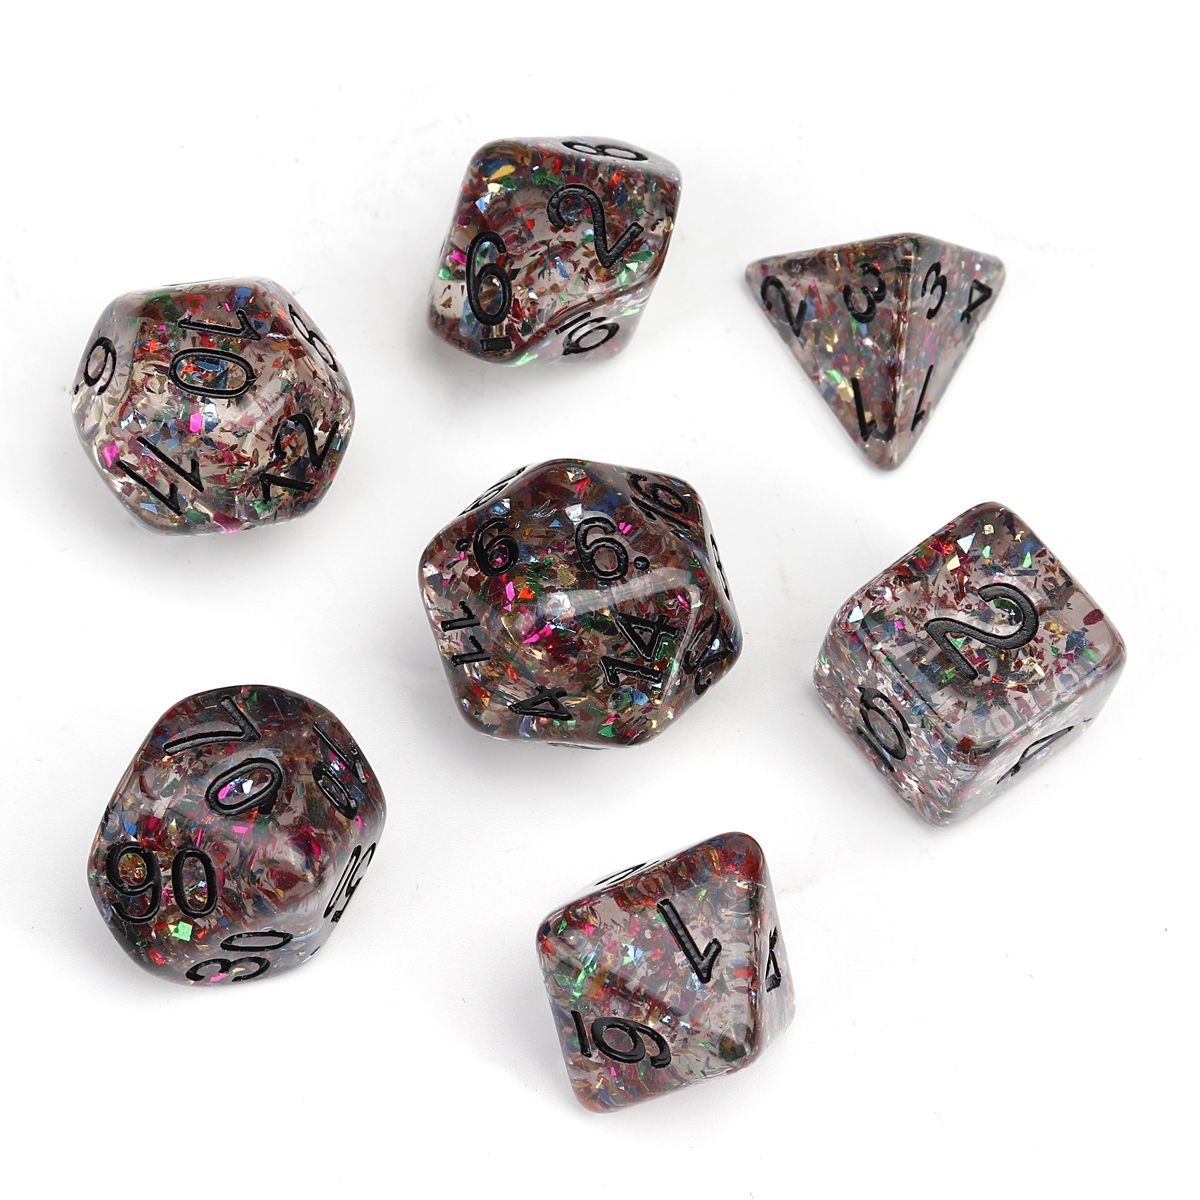 7pcs-Polyhedral-Dice-for-Dungeons-and-Dragons-Party-Game-Toy-With-Bag-1665729